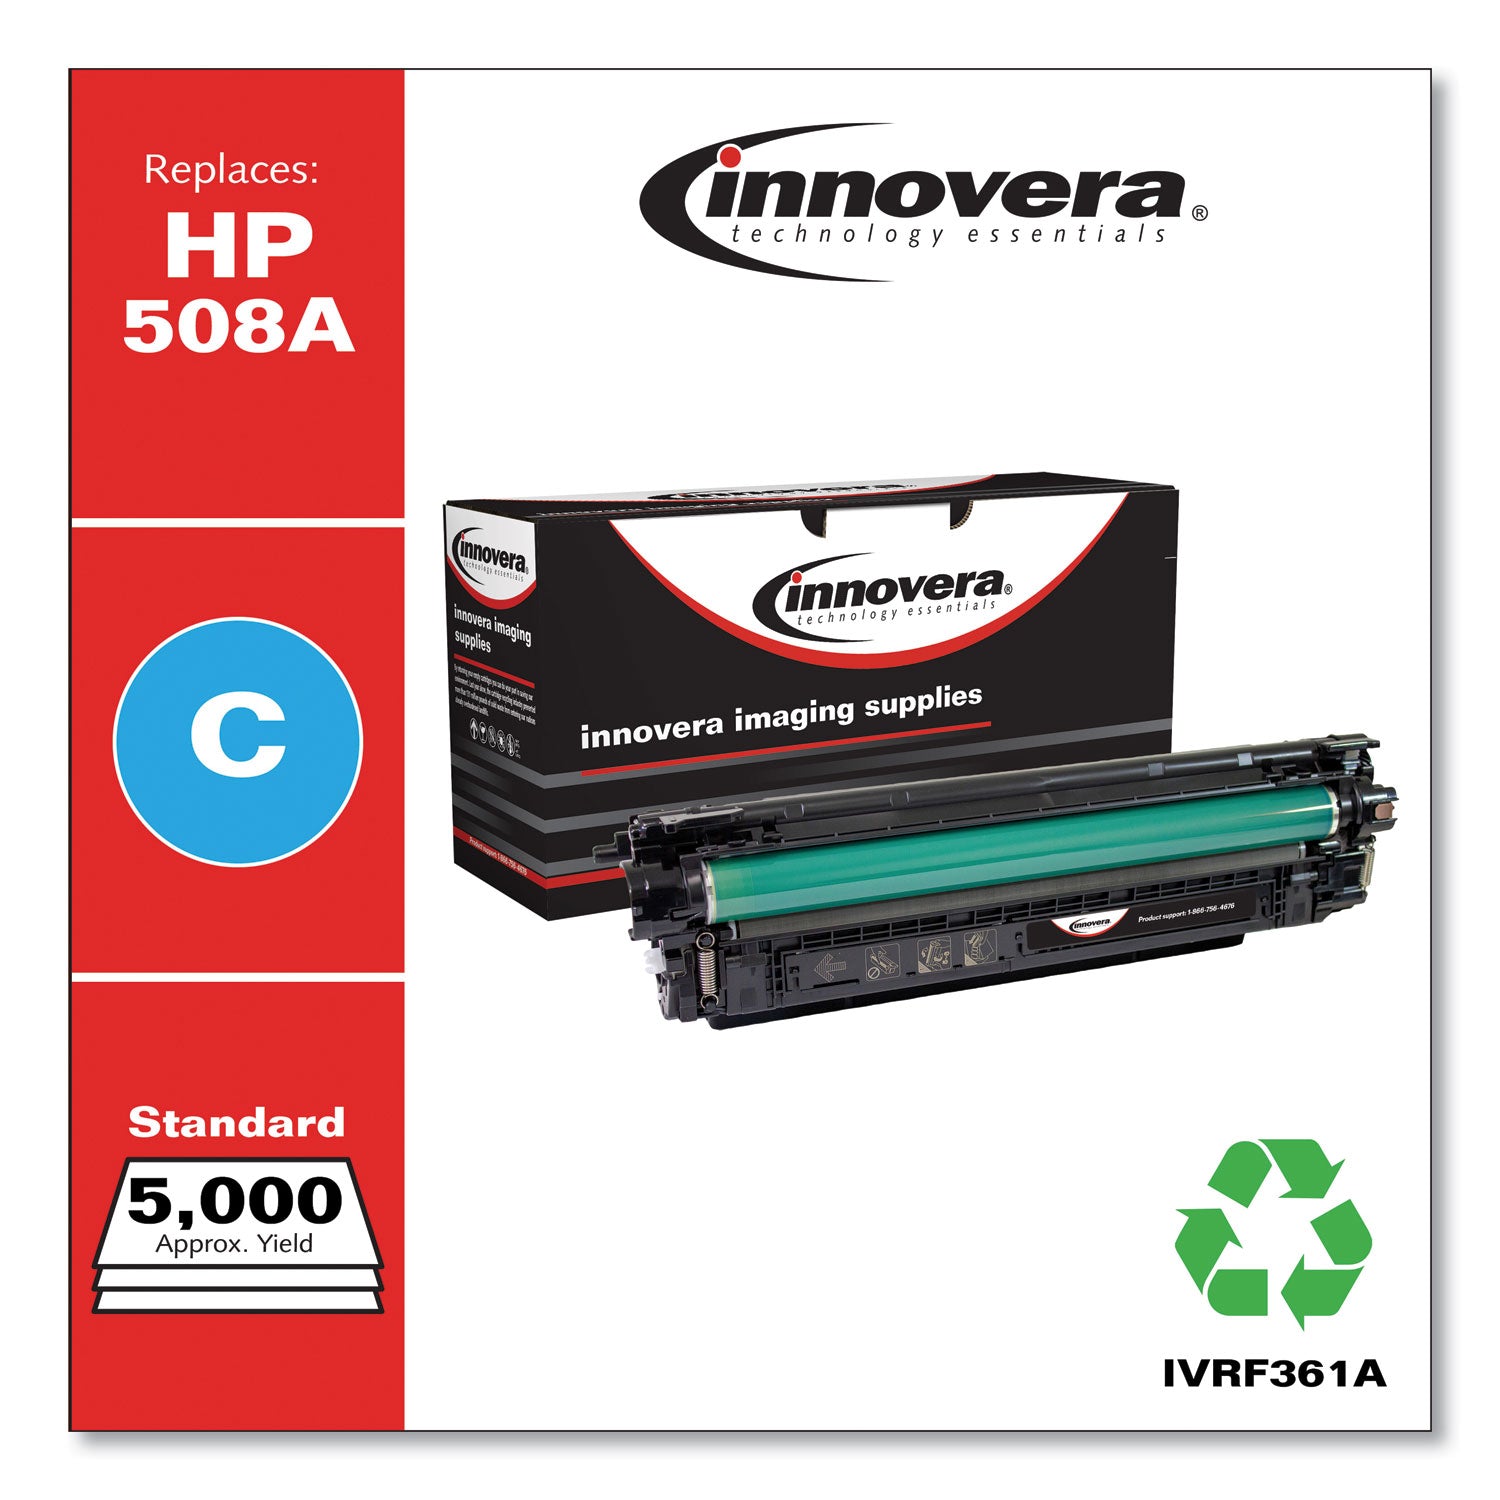 Remanufactured Cyan Toner, Replacement for 508A (CF361A), 5,000 Page-Yield - 2